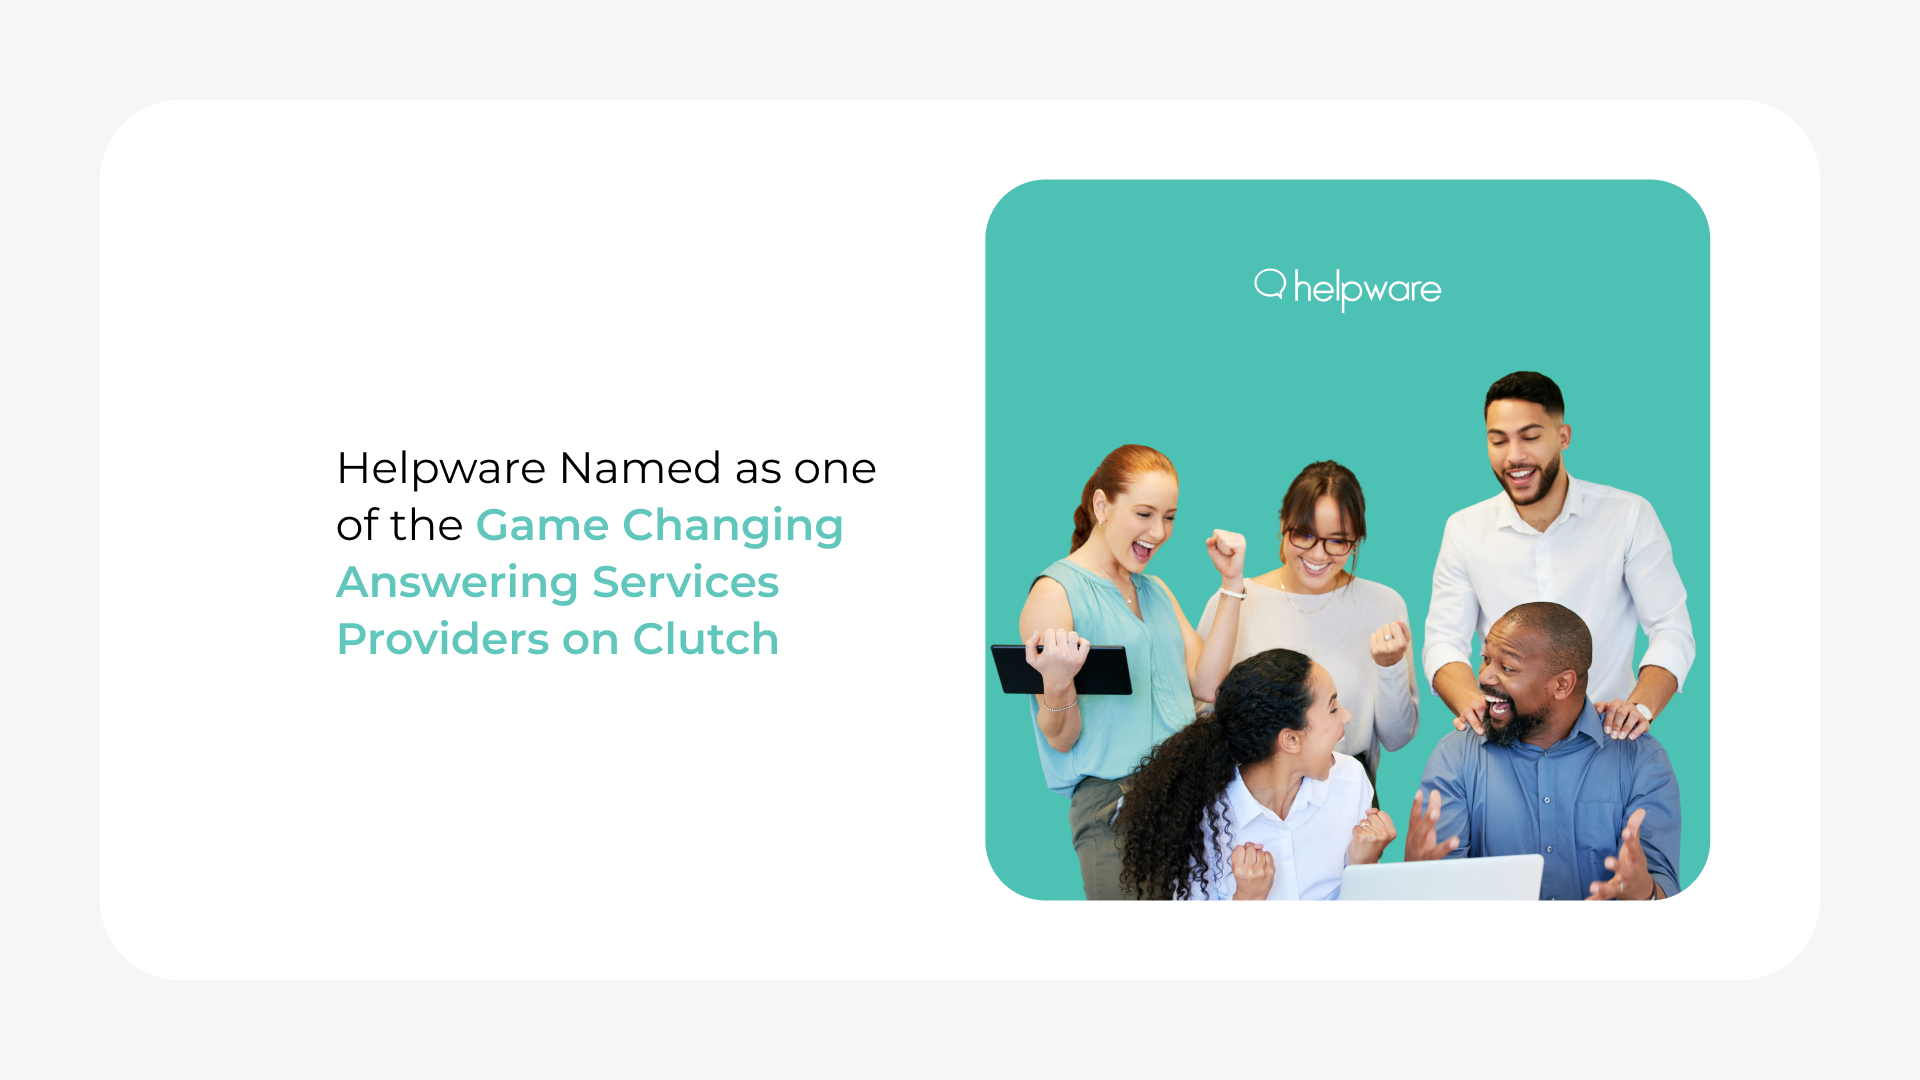 Helpware Named as one of the Game Changing Answering Services Providers on Clutch